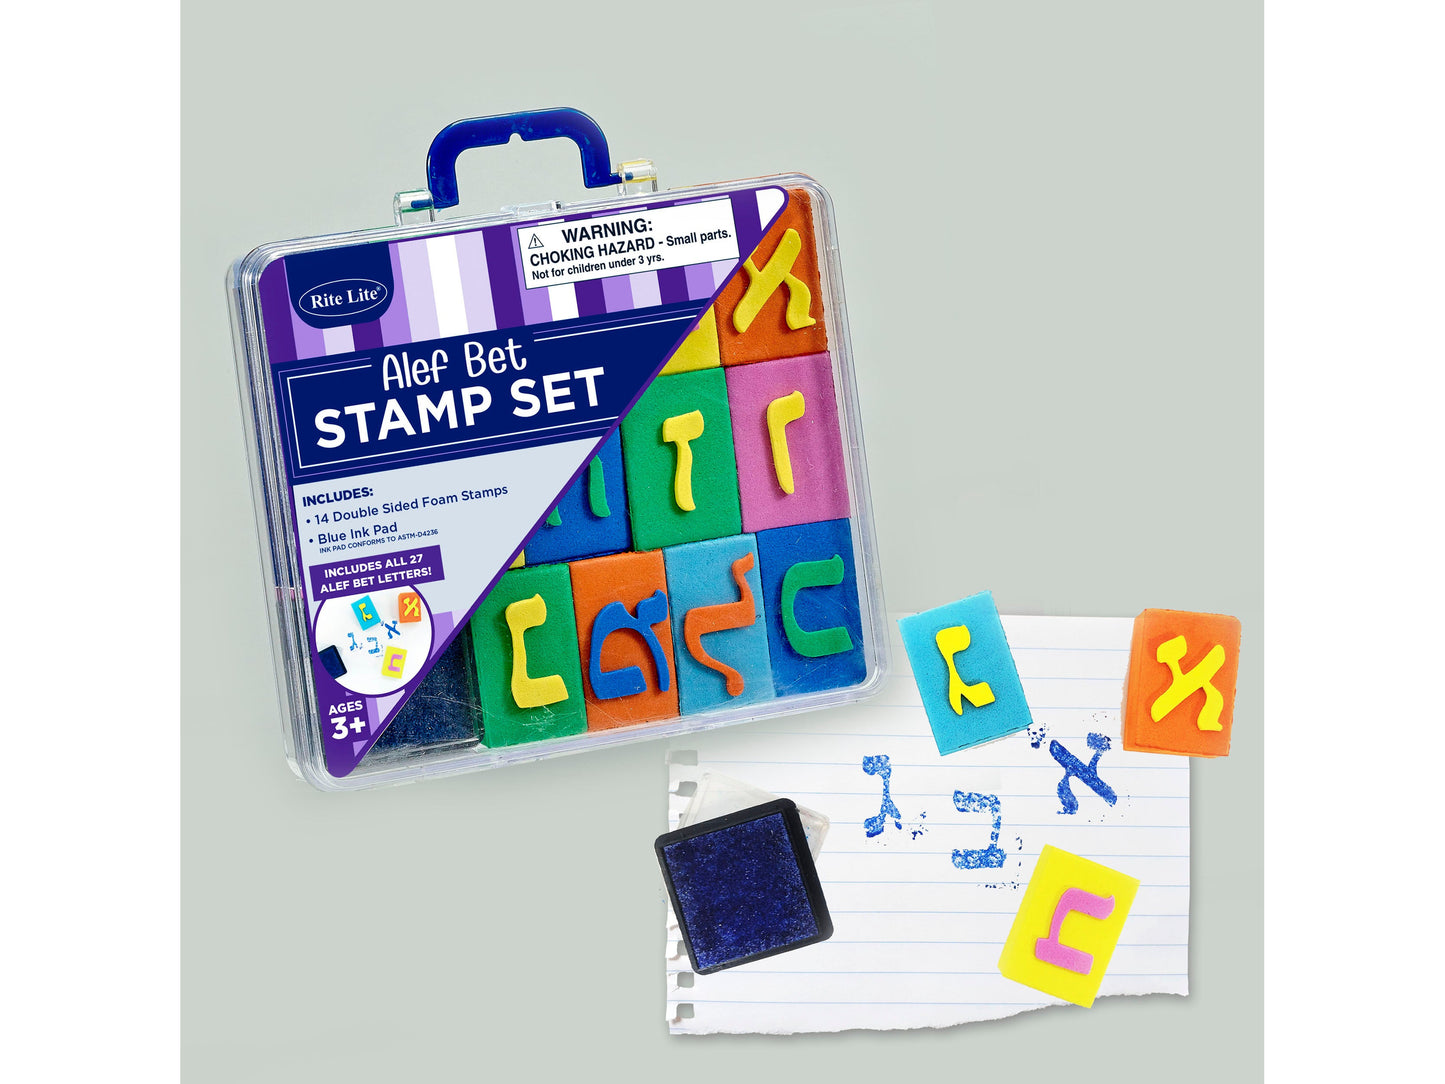 Alef bet stamp set in carrying case